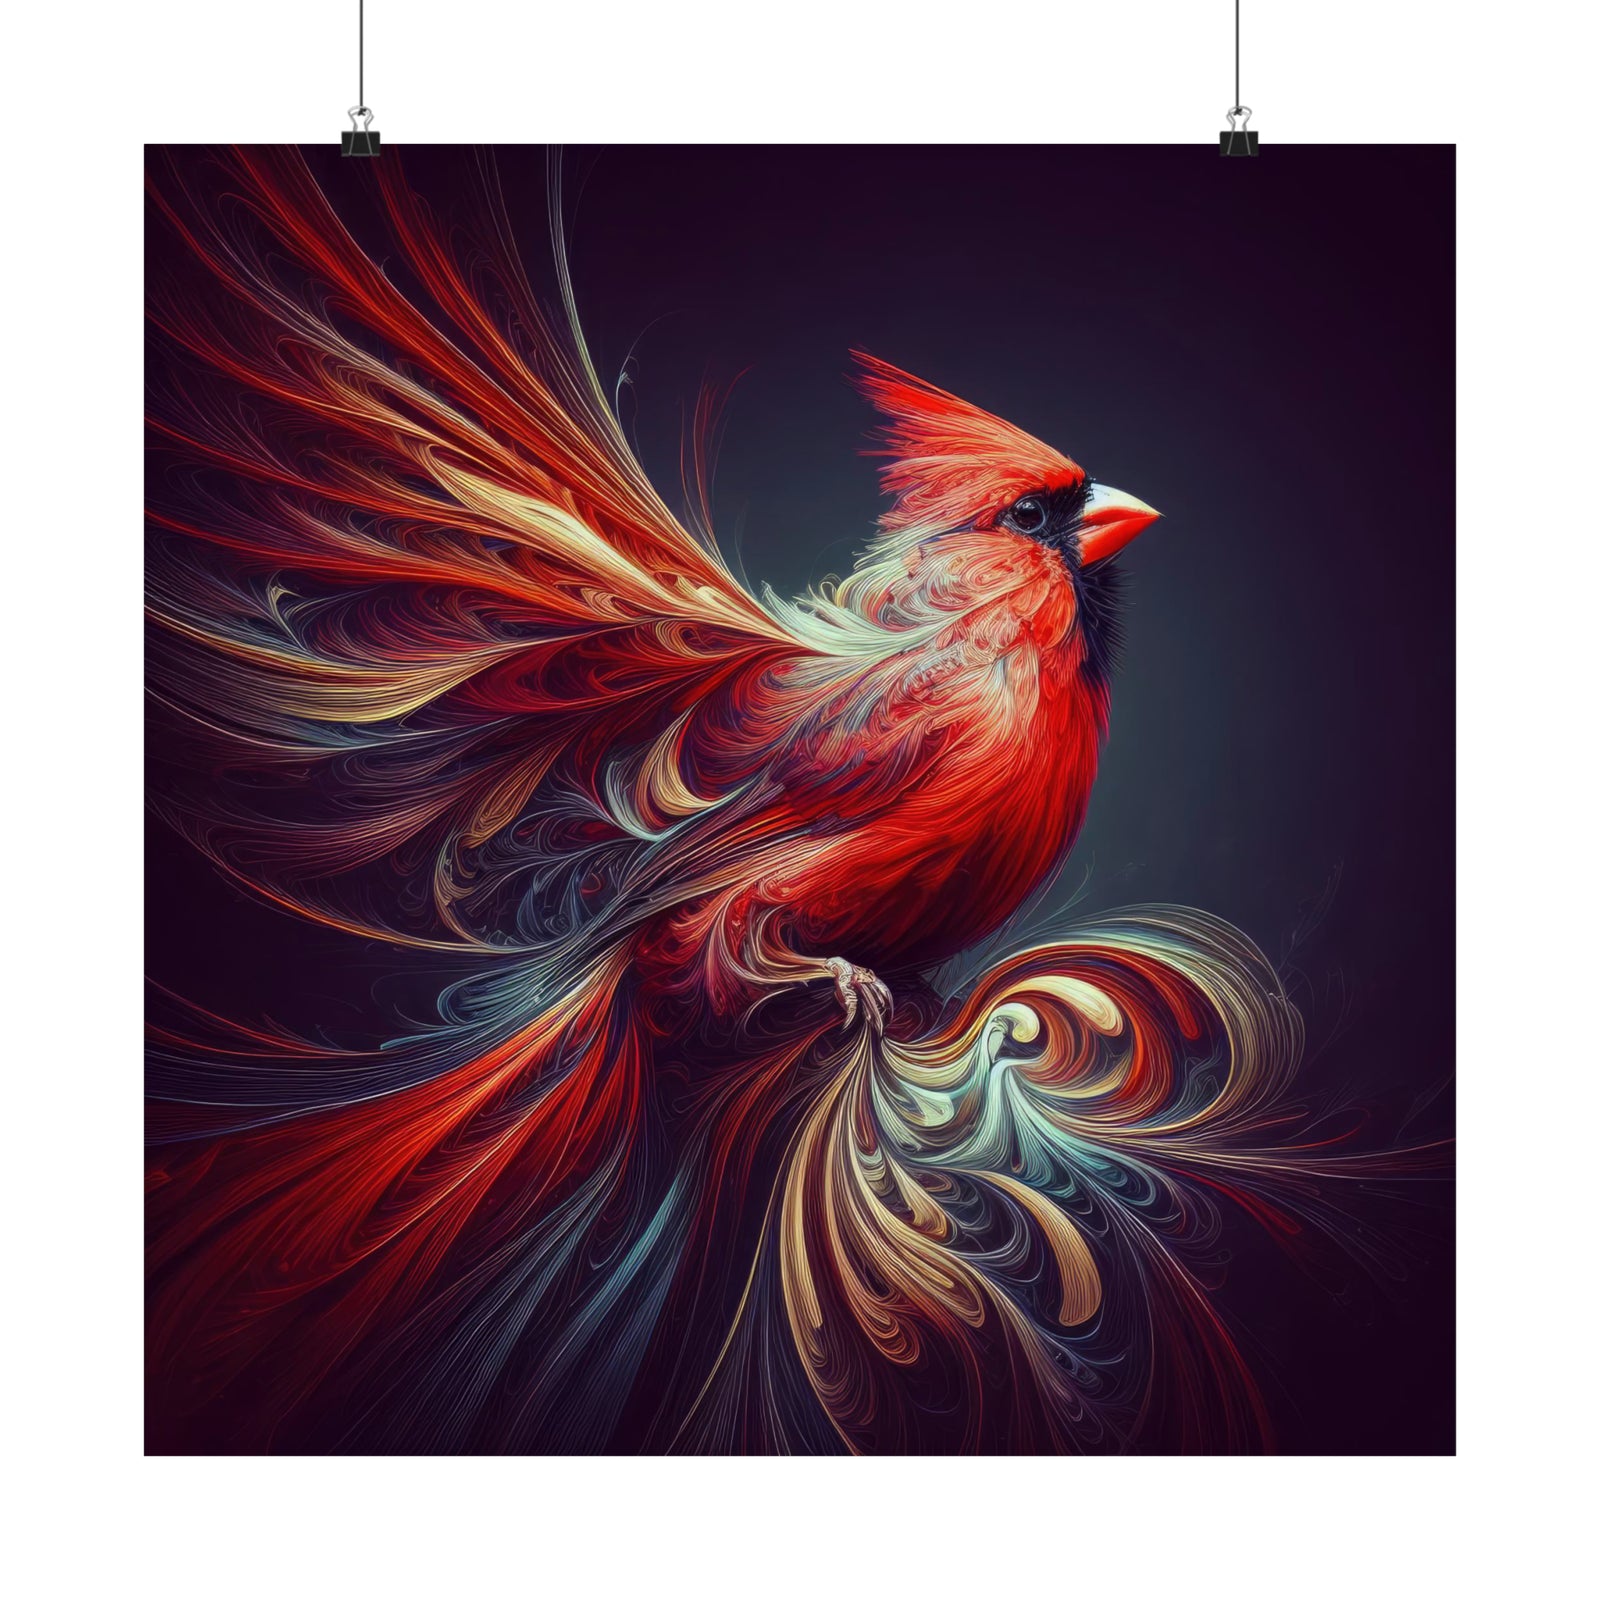 Fractal Symphony of the Red Cardinal Poster